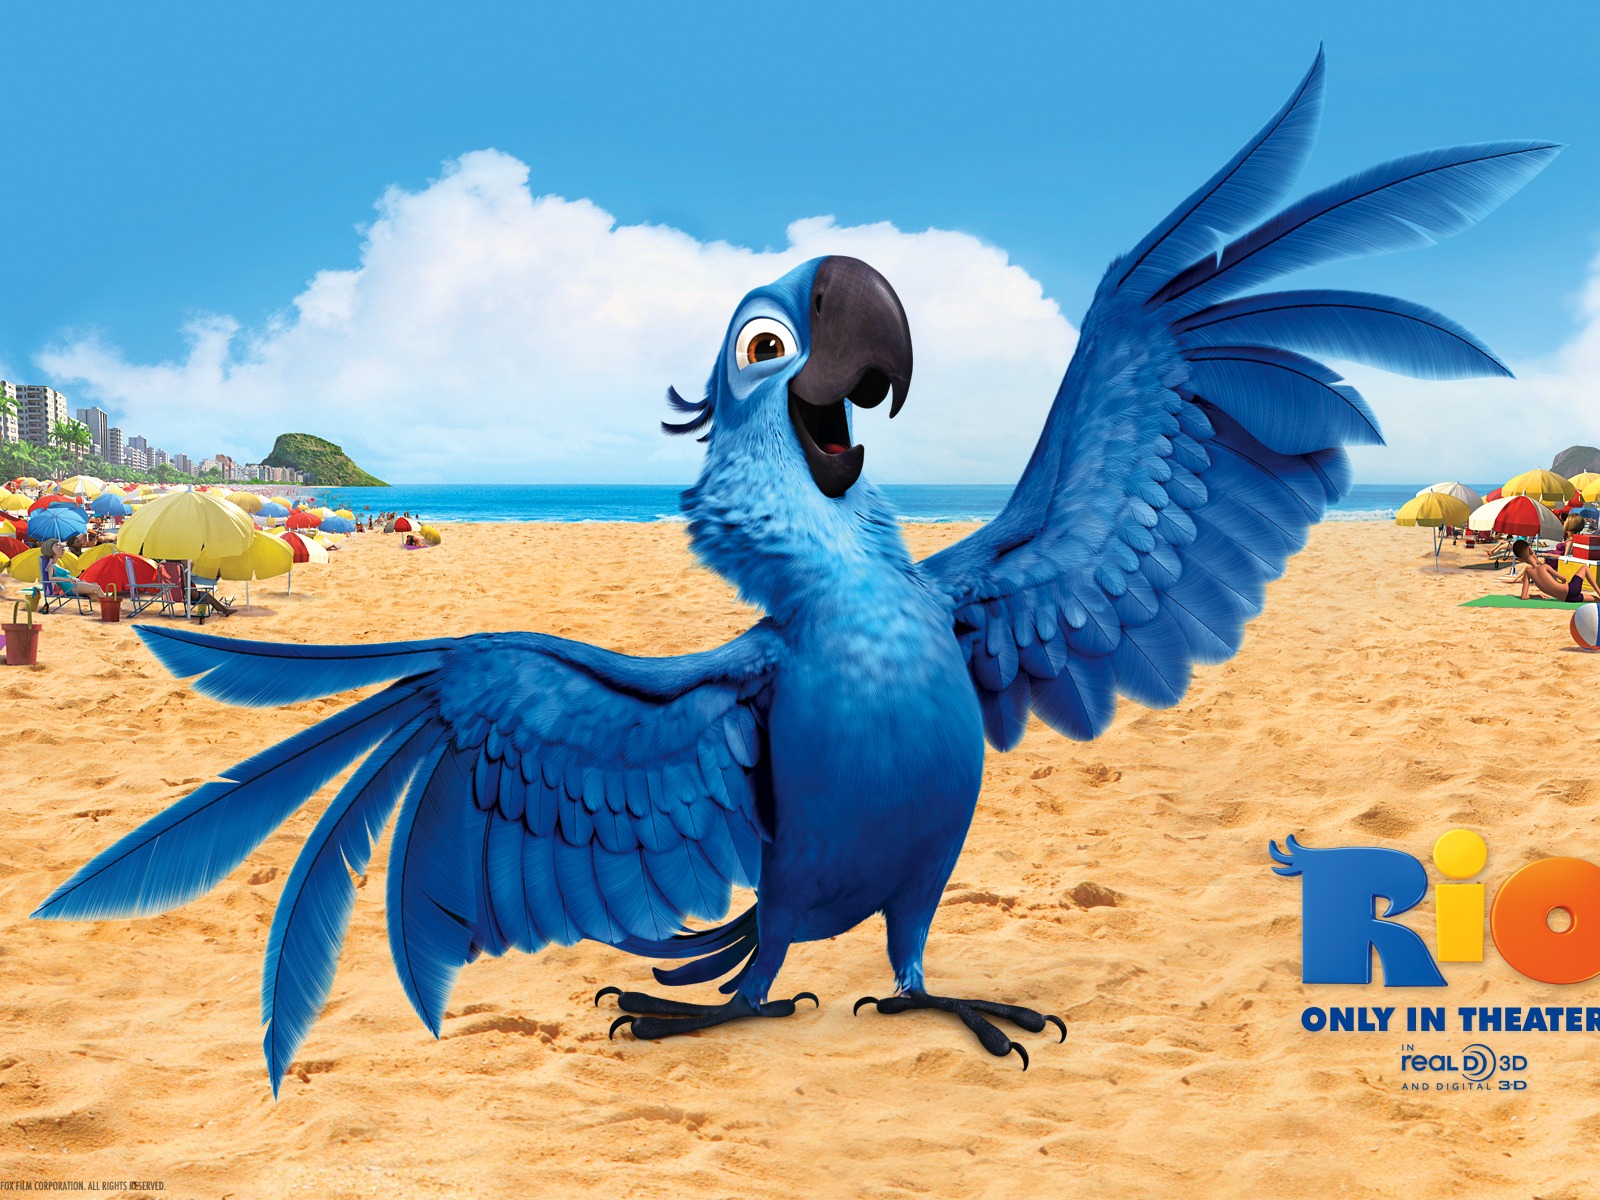 Rio 2011 wallpapers #4 - 1600x1200